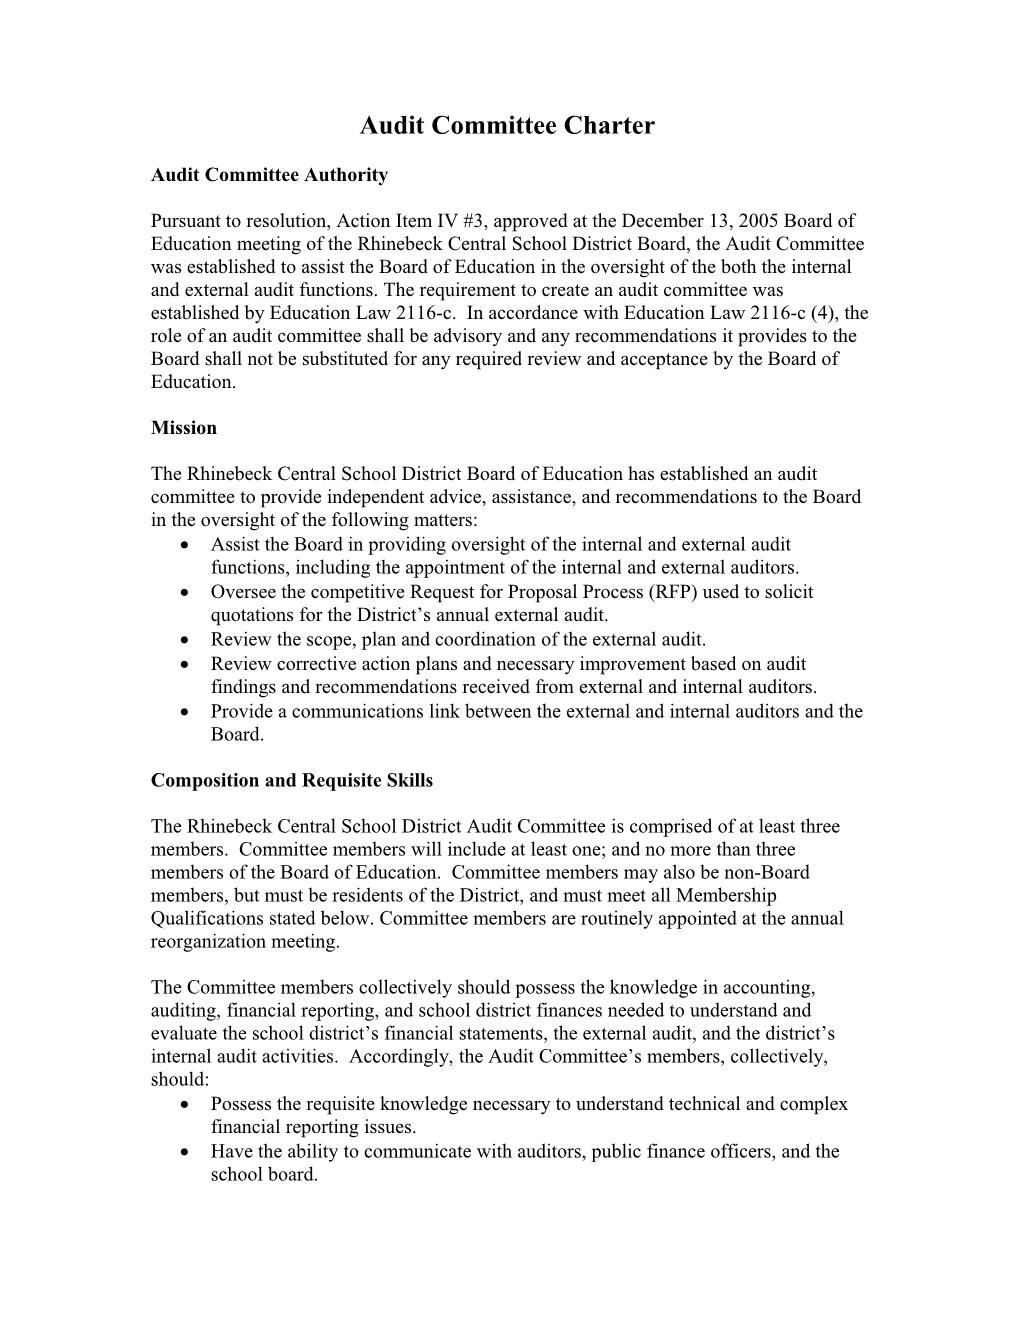 Audit Committee Charter DRAFT (Dated 12/5/06)